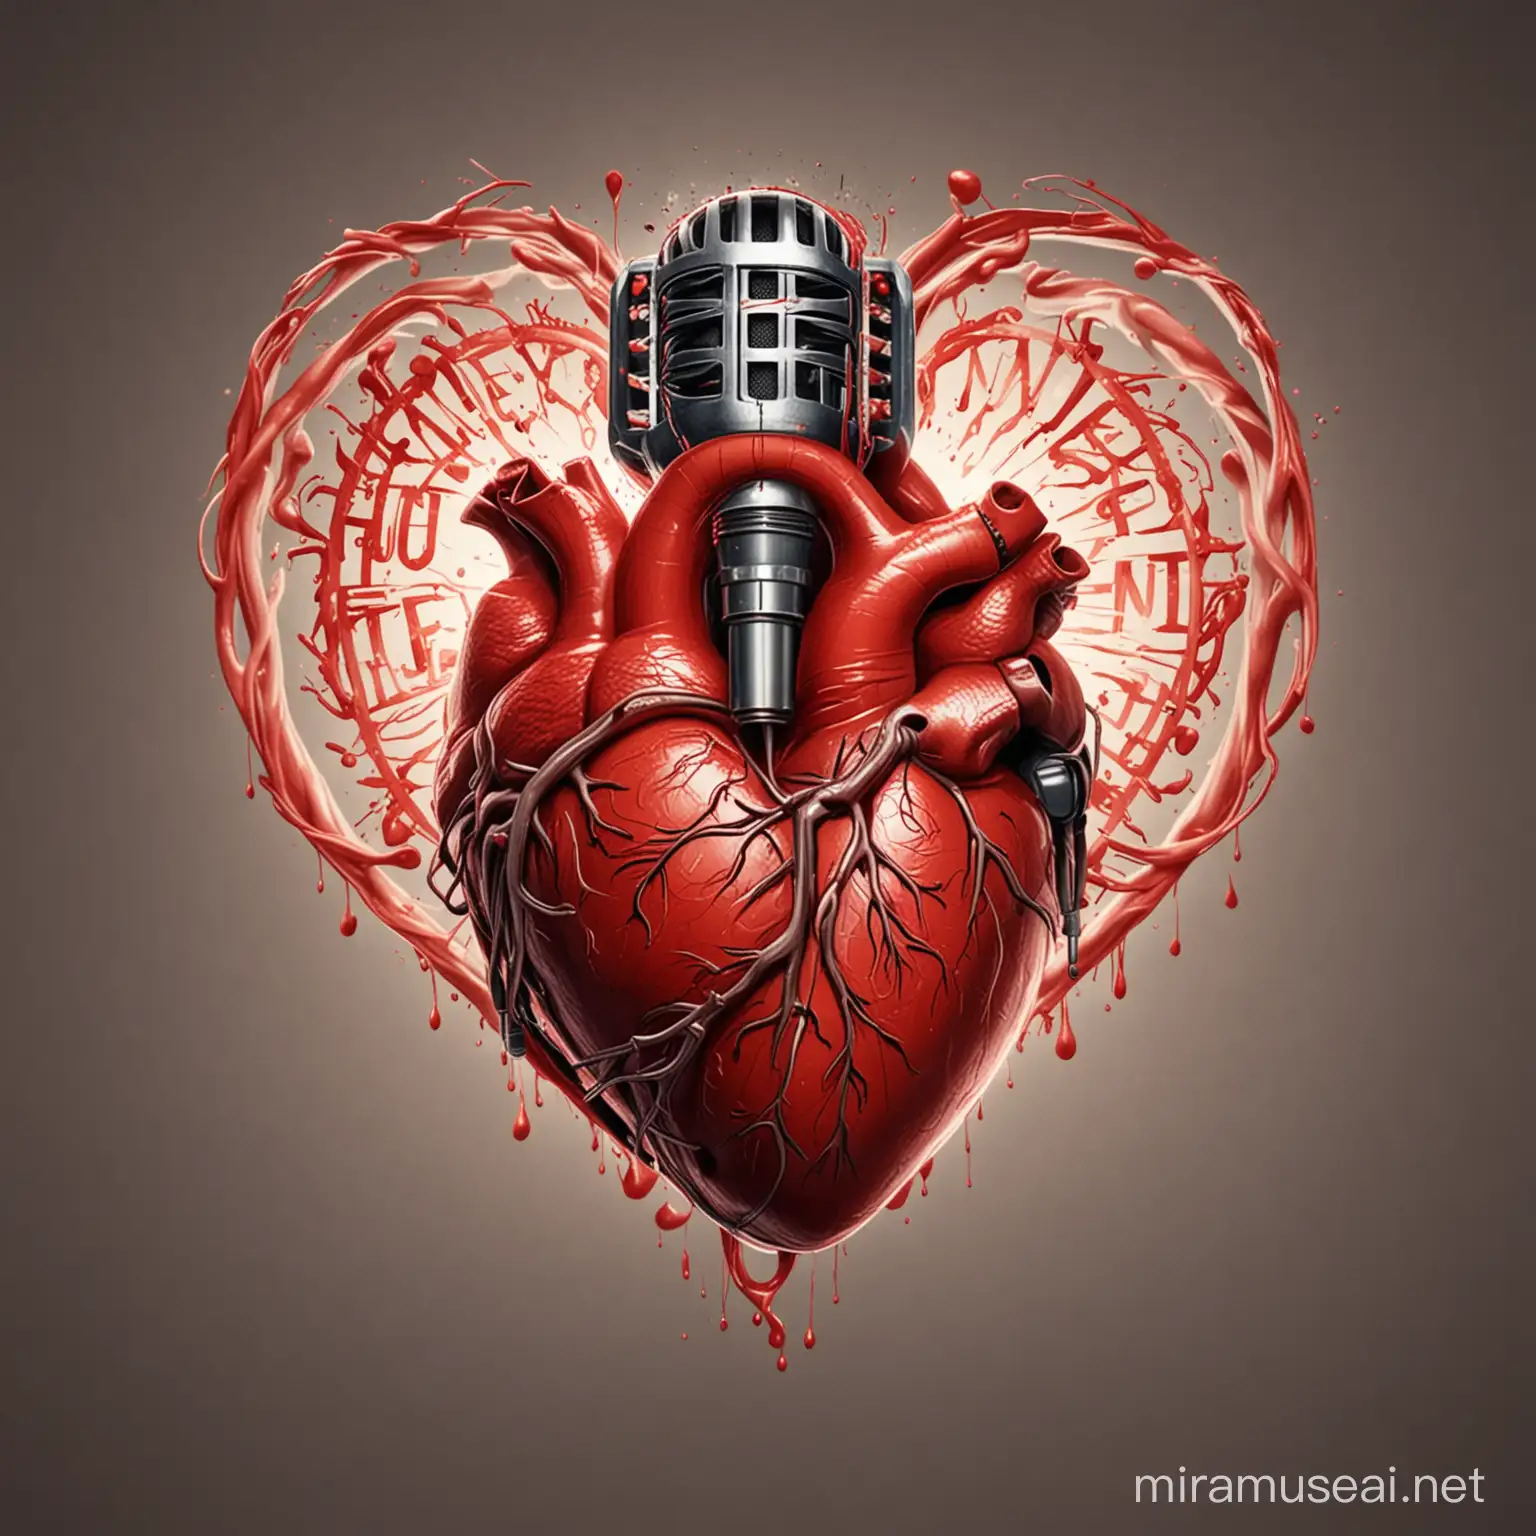 Make logo for YouTube channel in logo human heart having mic in one hand and it look like he is singing